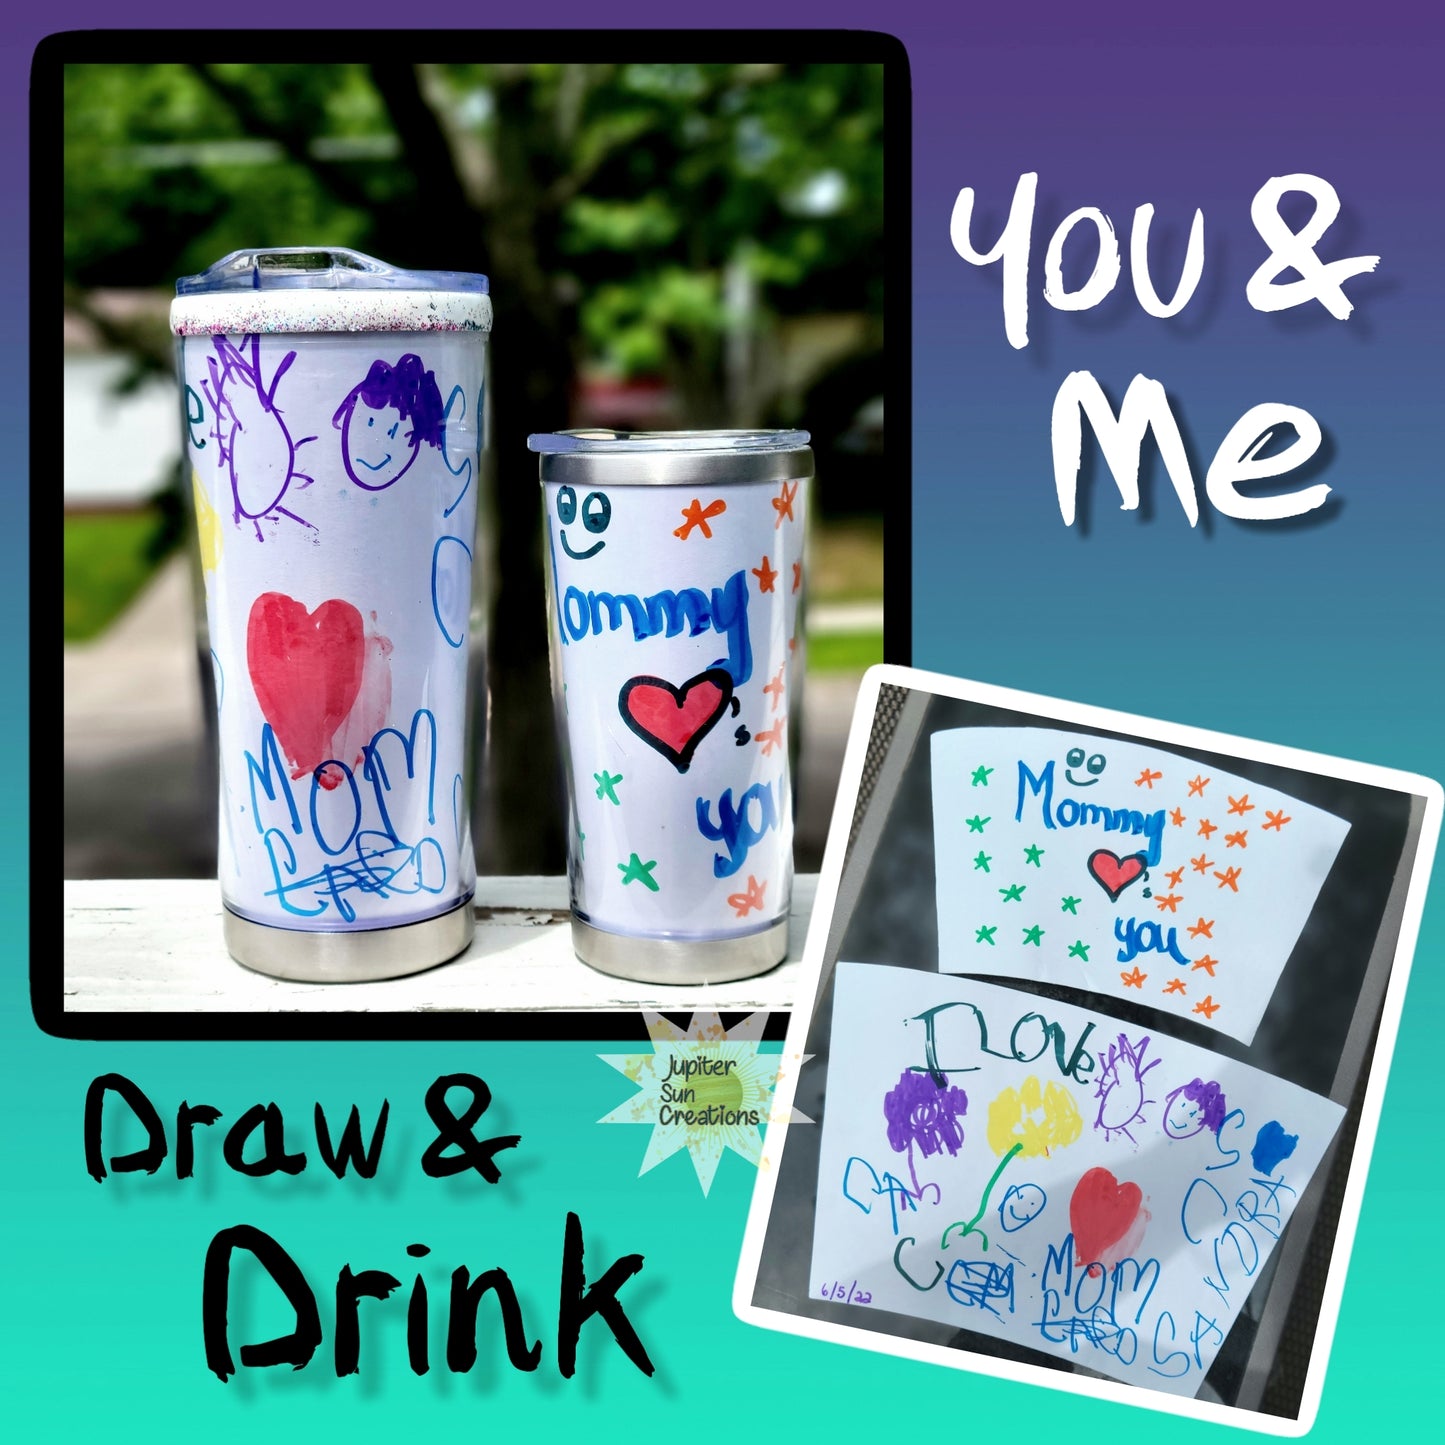 Draw and drink 20 oz